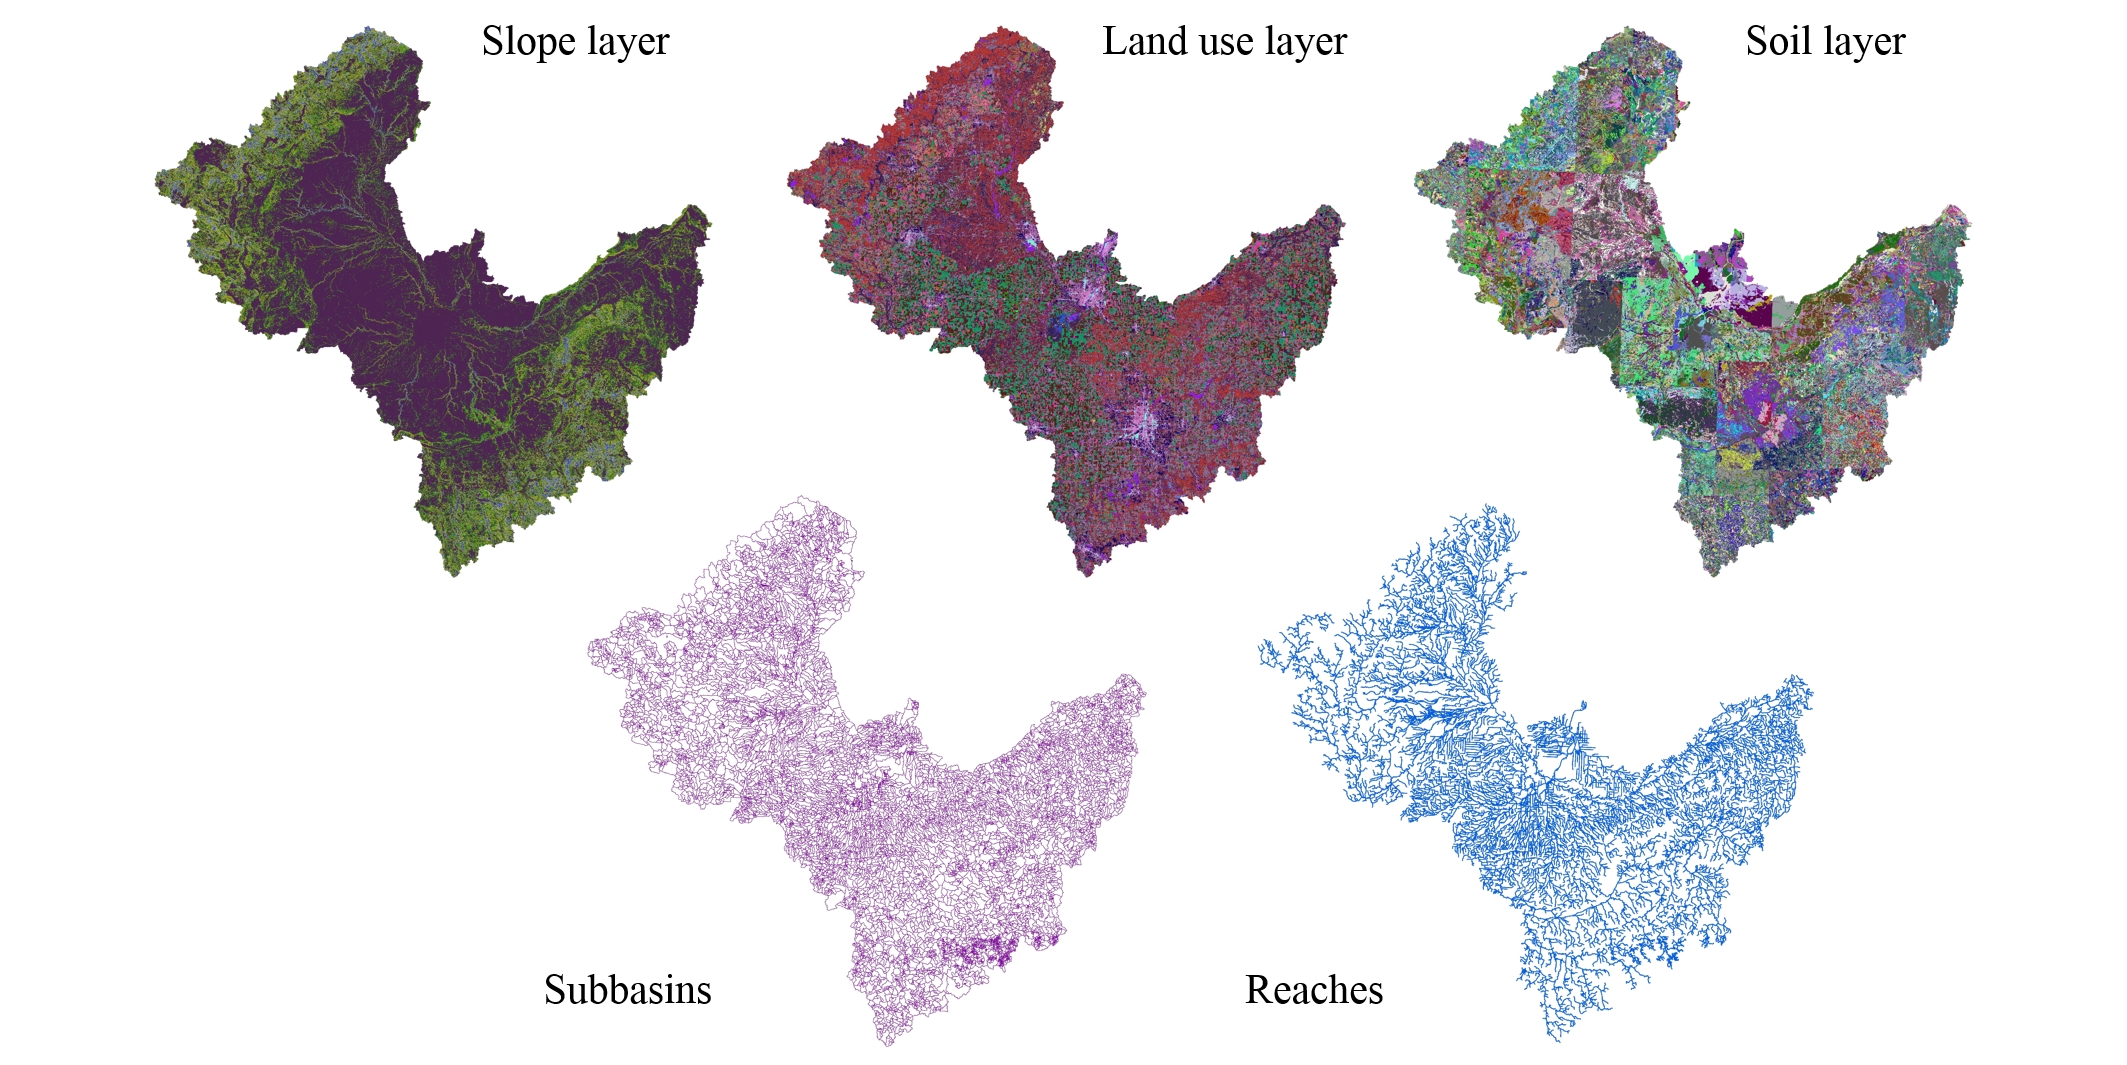 Photo of geospatical layers including slope, land use, soil type, subbasin boundaries, and river networks as used to build a biophysical model for the Saginaw River watershed in Michigan.